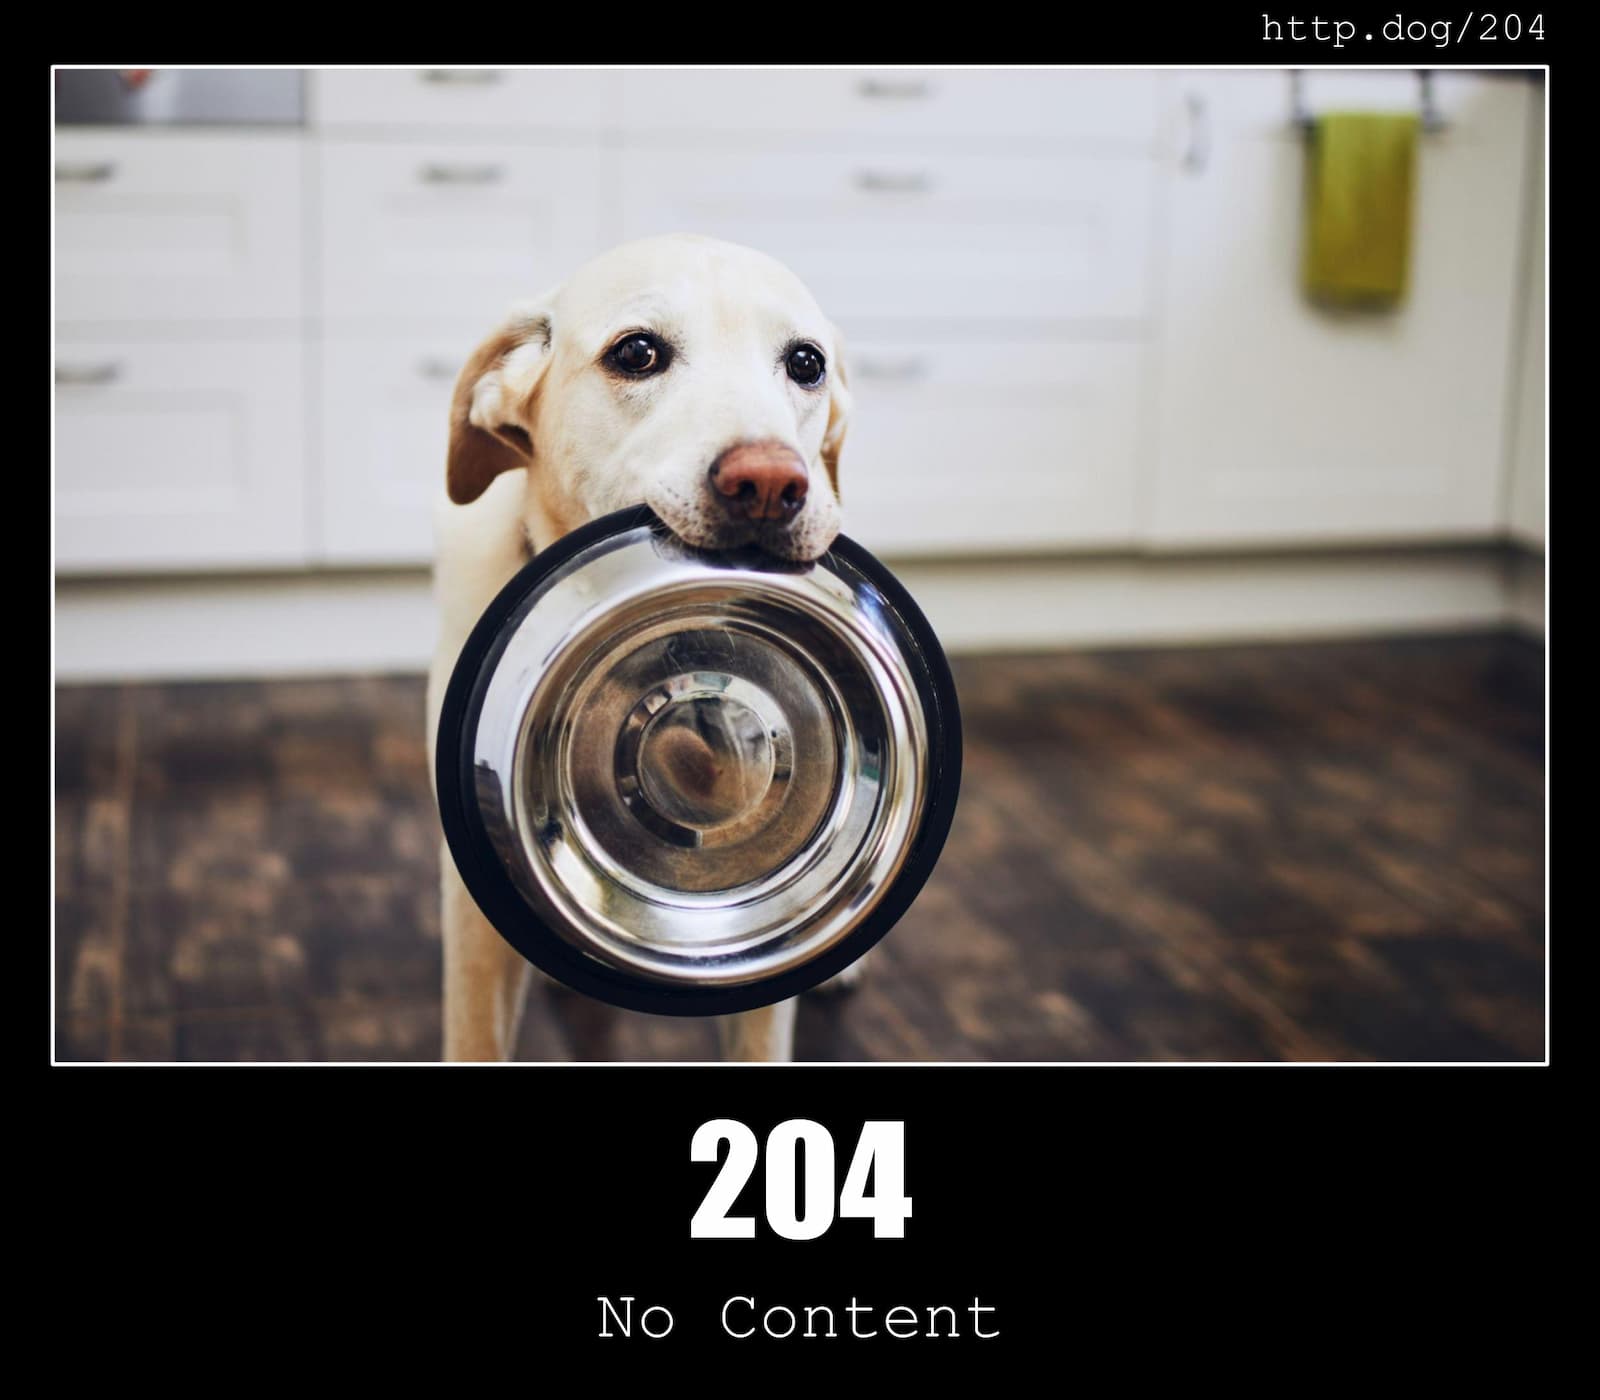 HTTP Status Code 204 No Content & Dogs